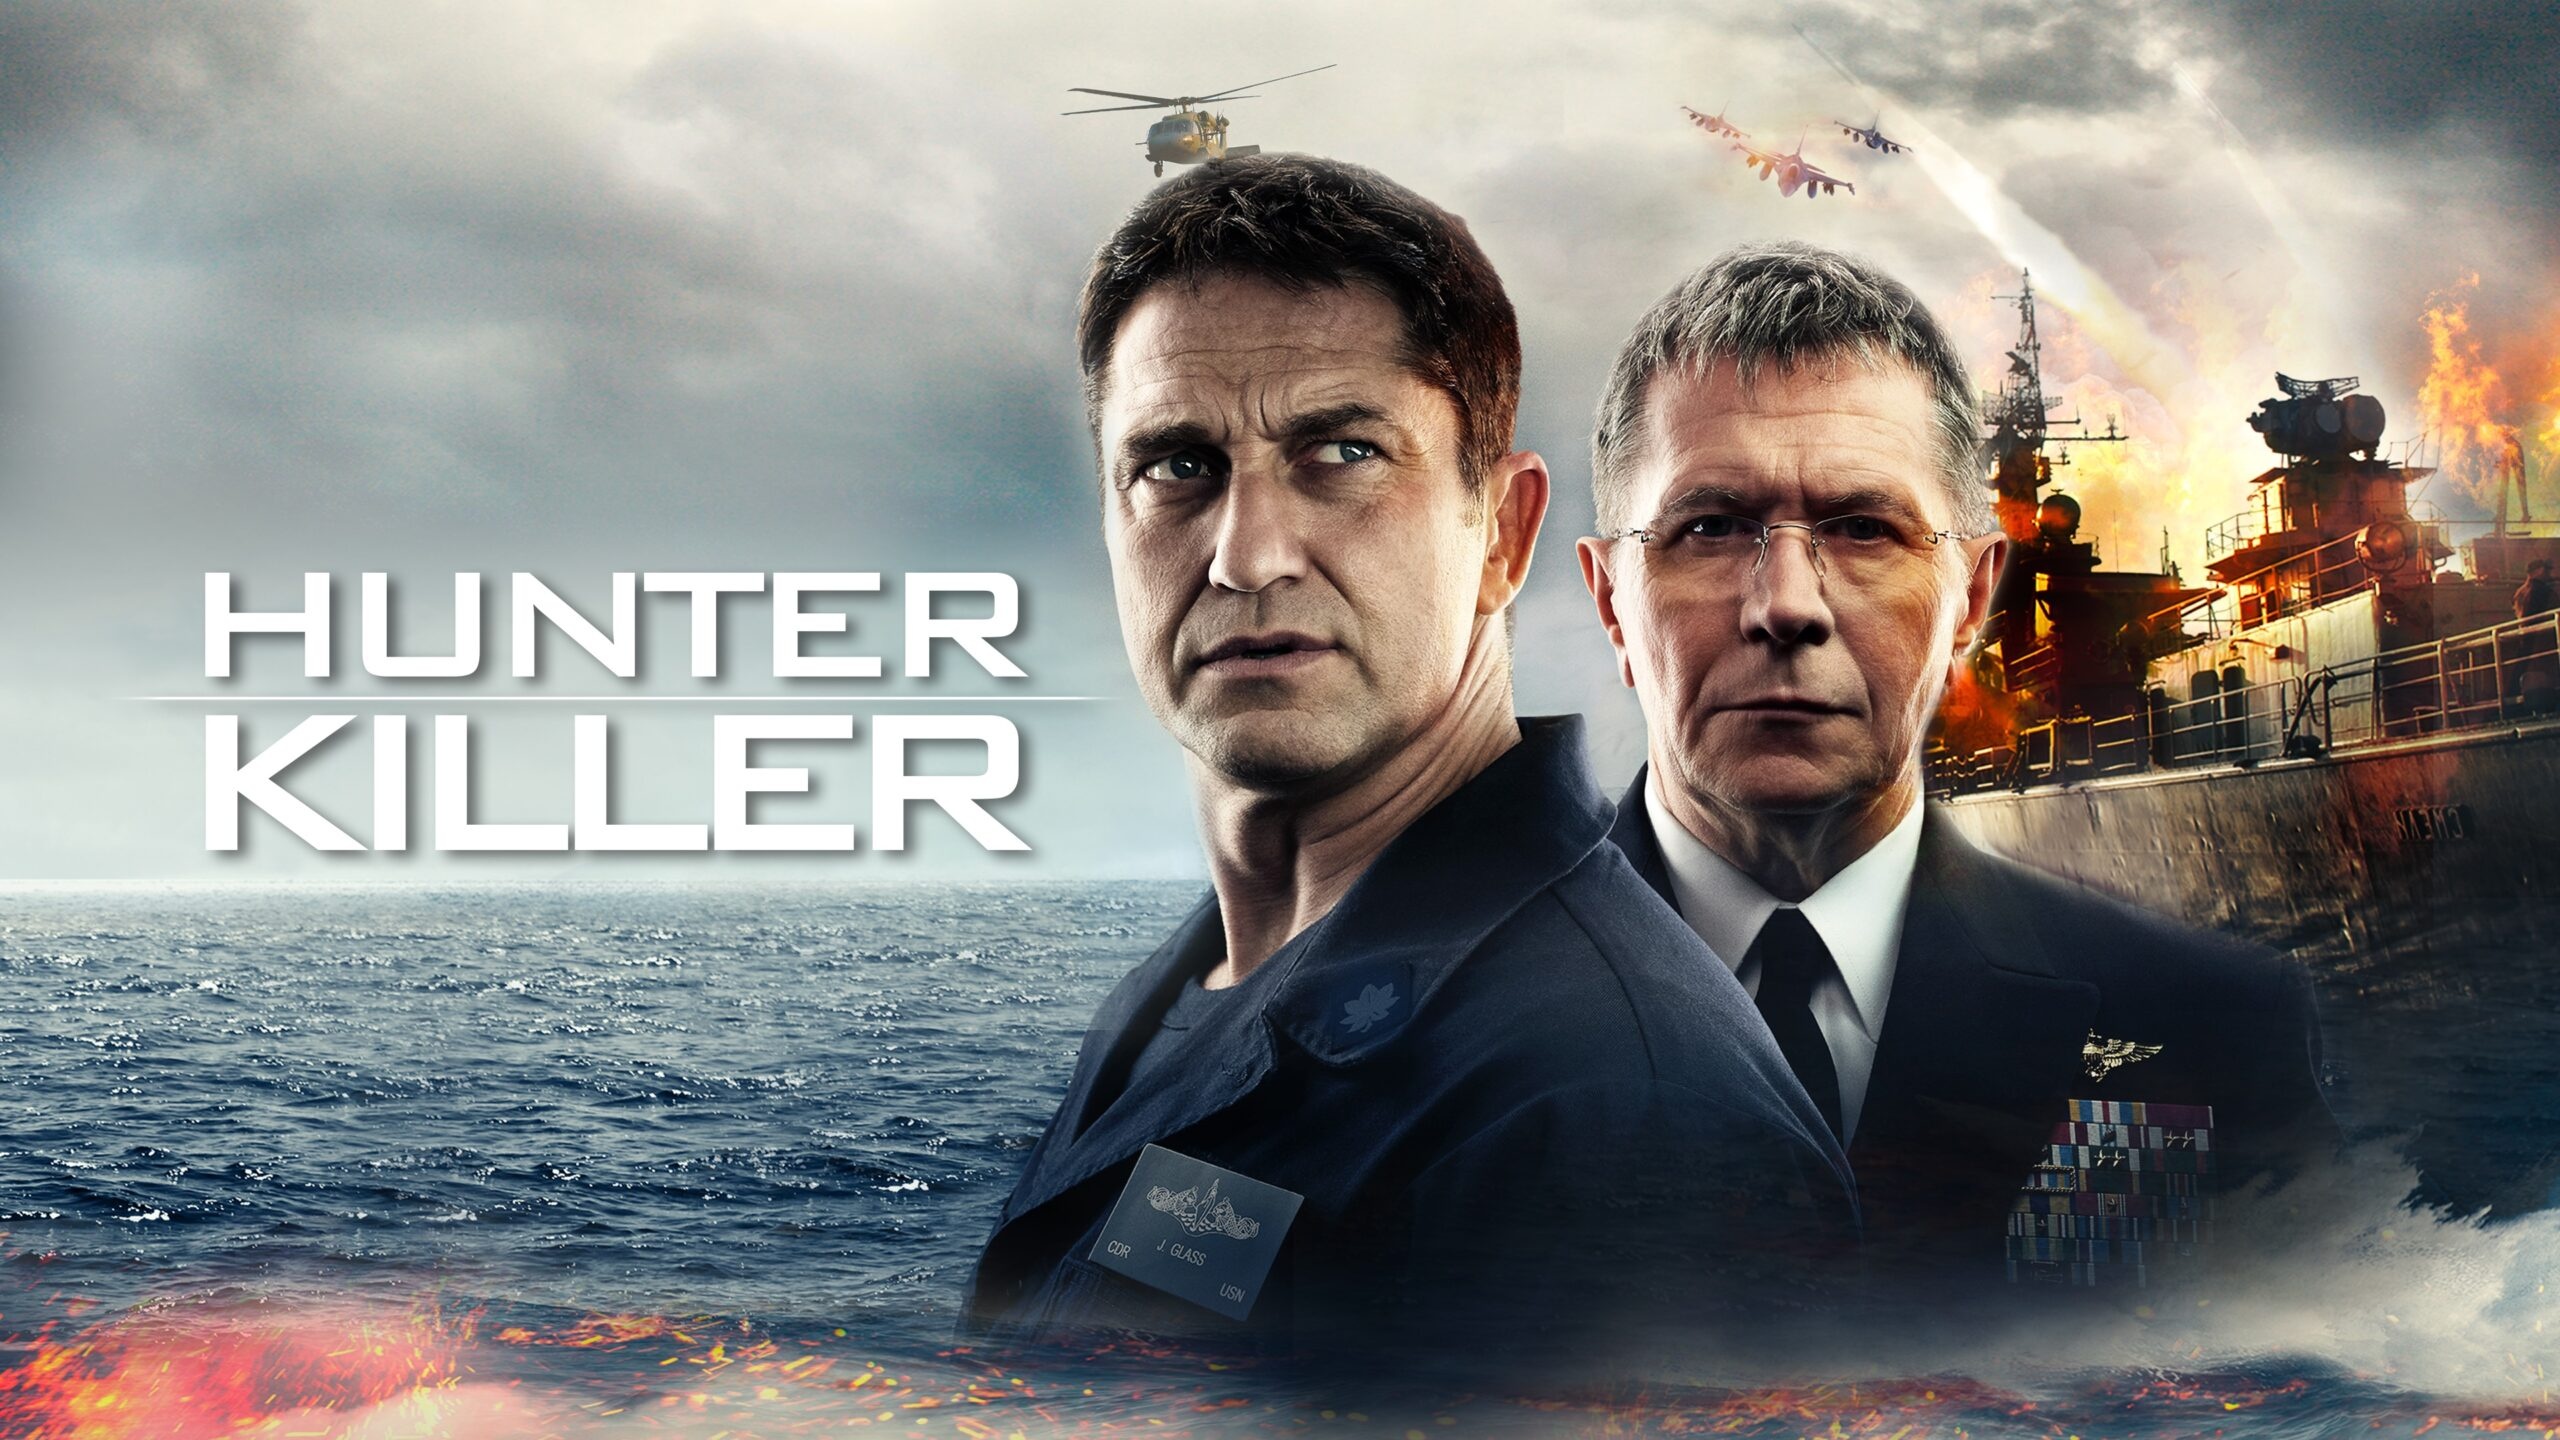 Hunter Killer movie, Jumpcut online review, Action-packed thriller, Edge-of-your-seat excitement, 2560x1440 HD Desktop